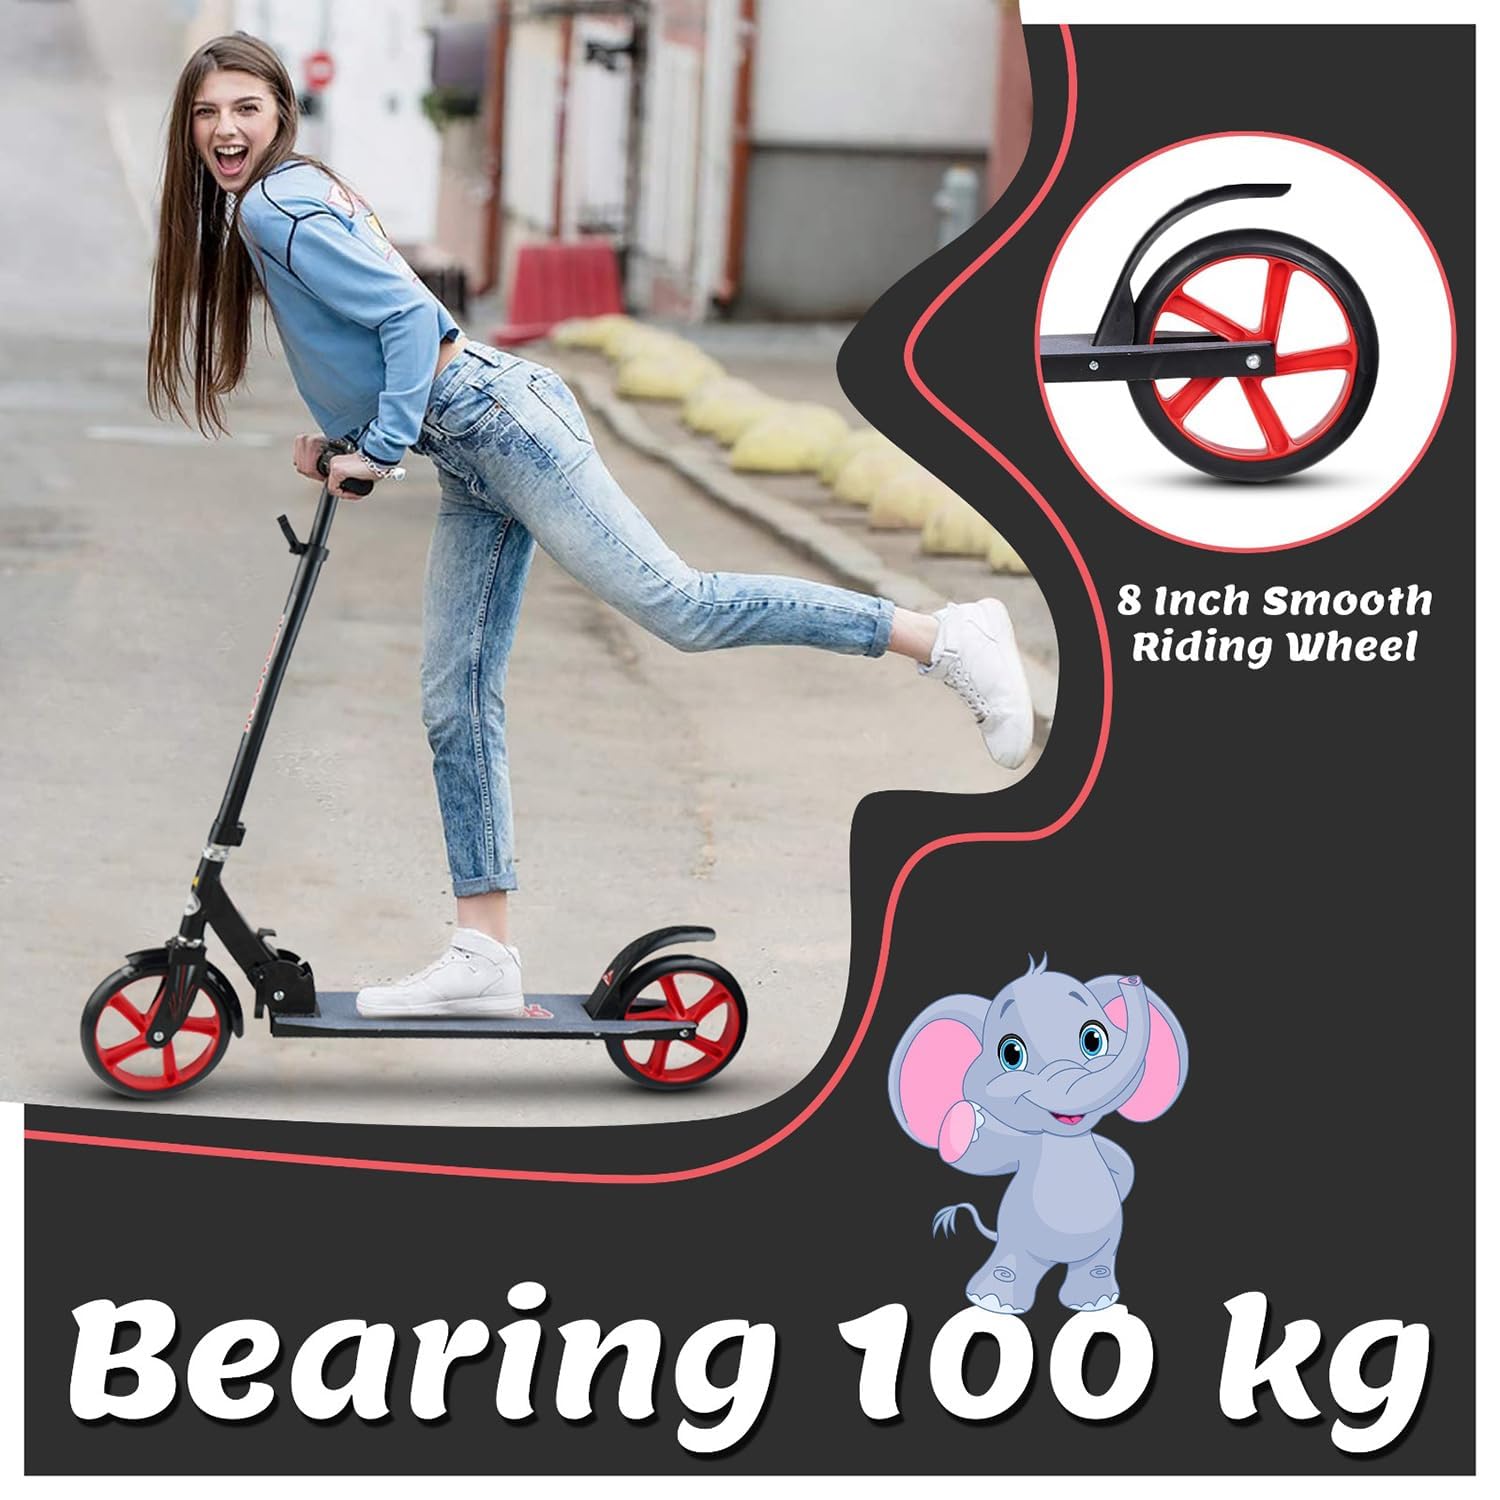 Braintastic Folding Ranger Kick Scooter Light Weight Made with Aeronautical Grade Aluminum Alloy with 3 Adjustment Levels Big 200 mm Wheels Scooters with Carry Strap for Kids